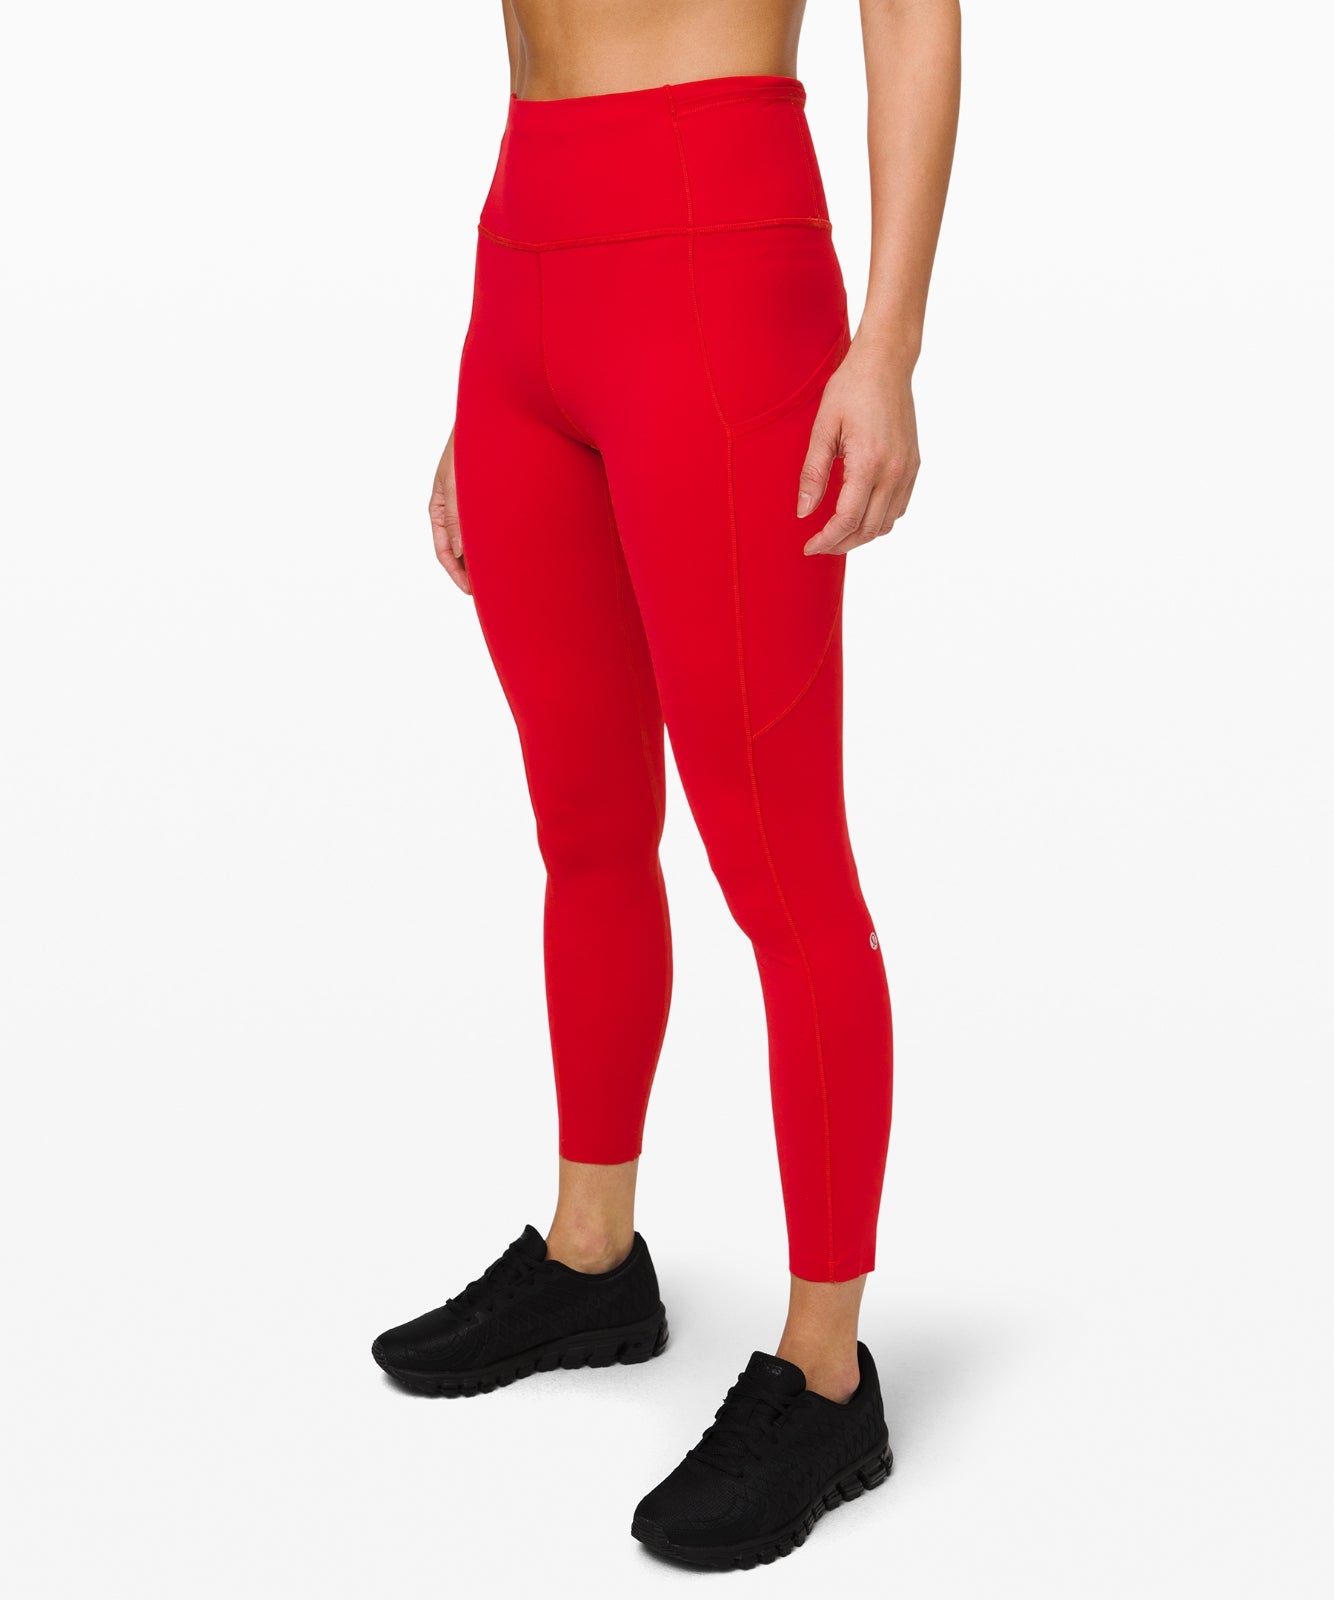 what are the classic lululemon leggings called